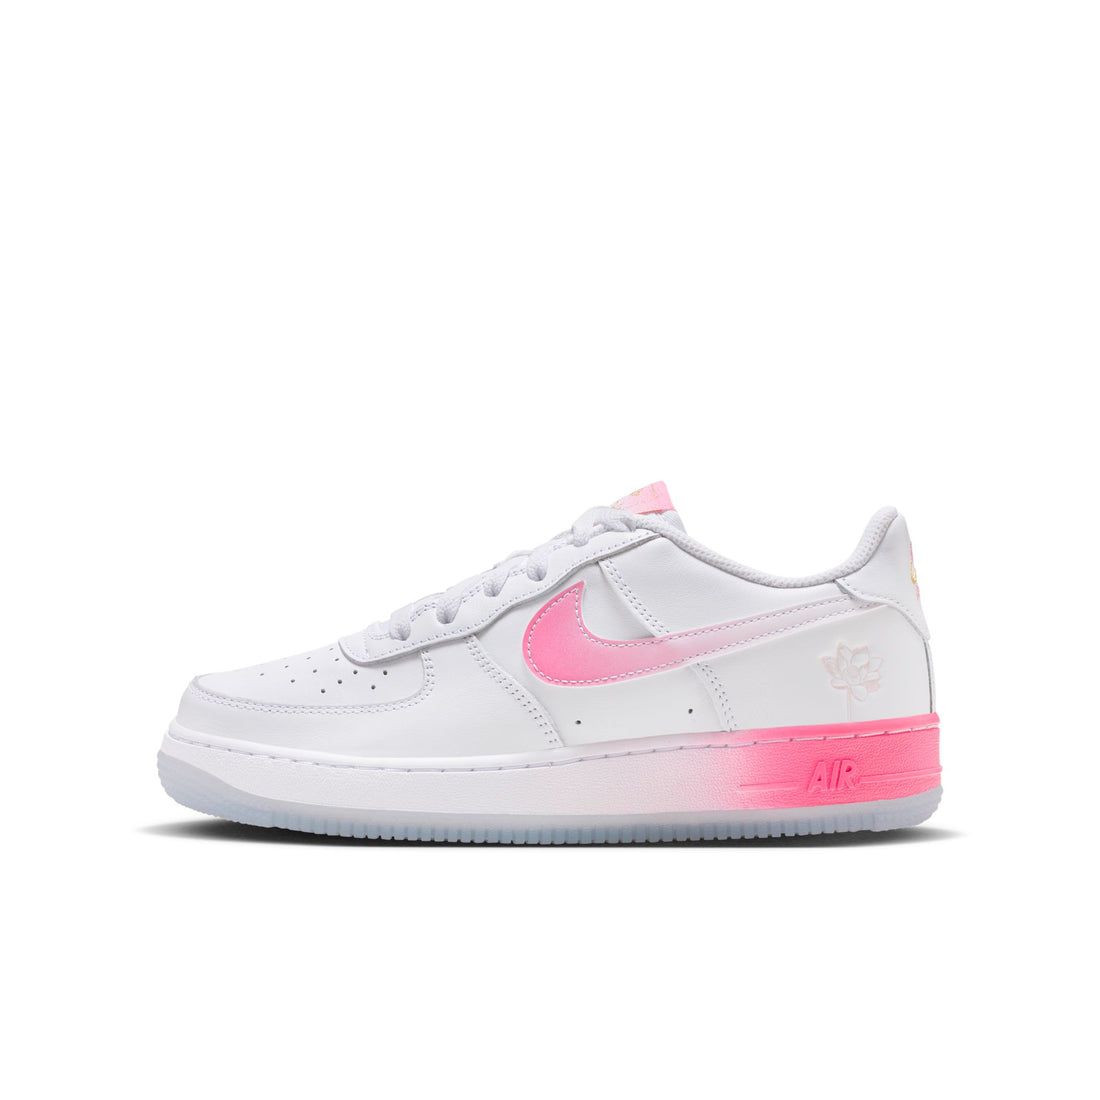 Air Force 1 Low LV8 "Chinatown" (GS)